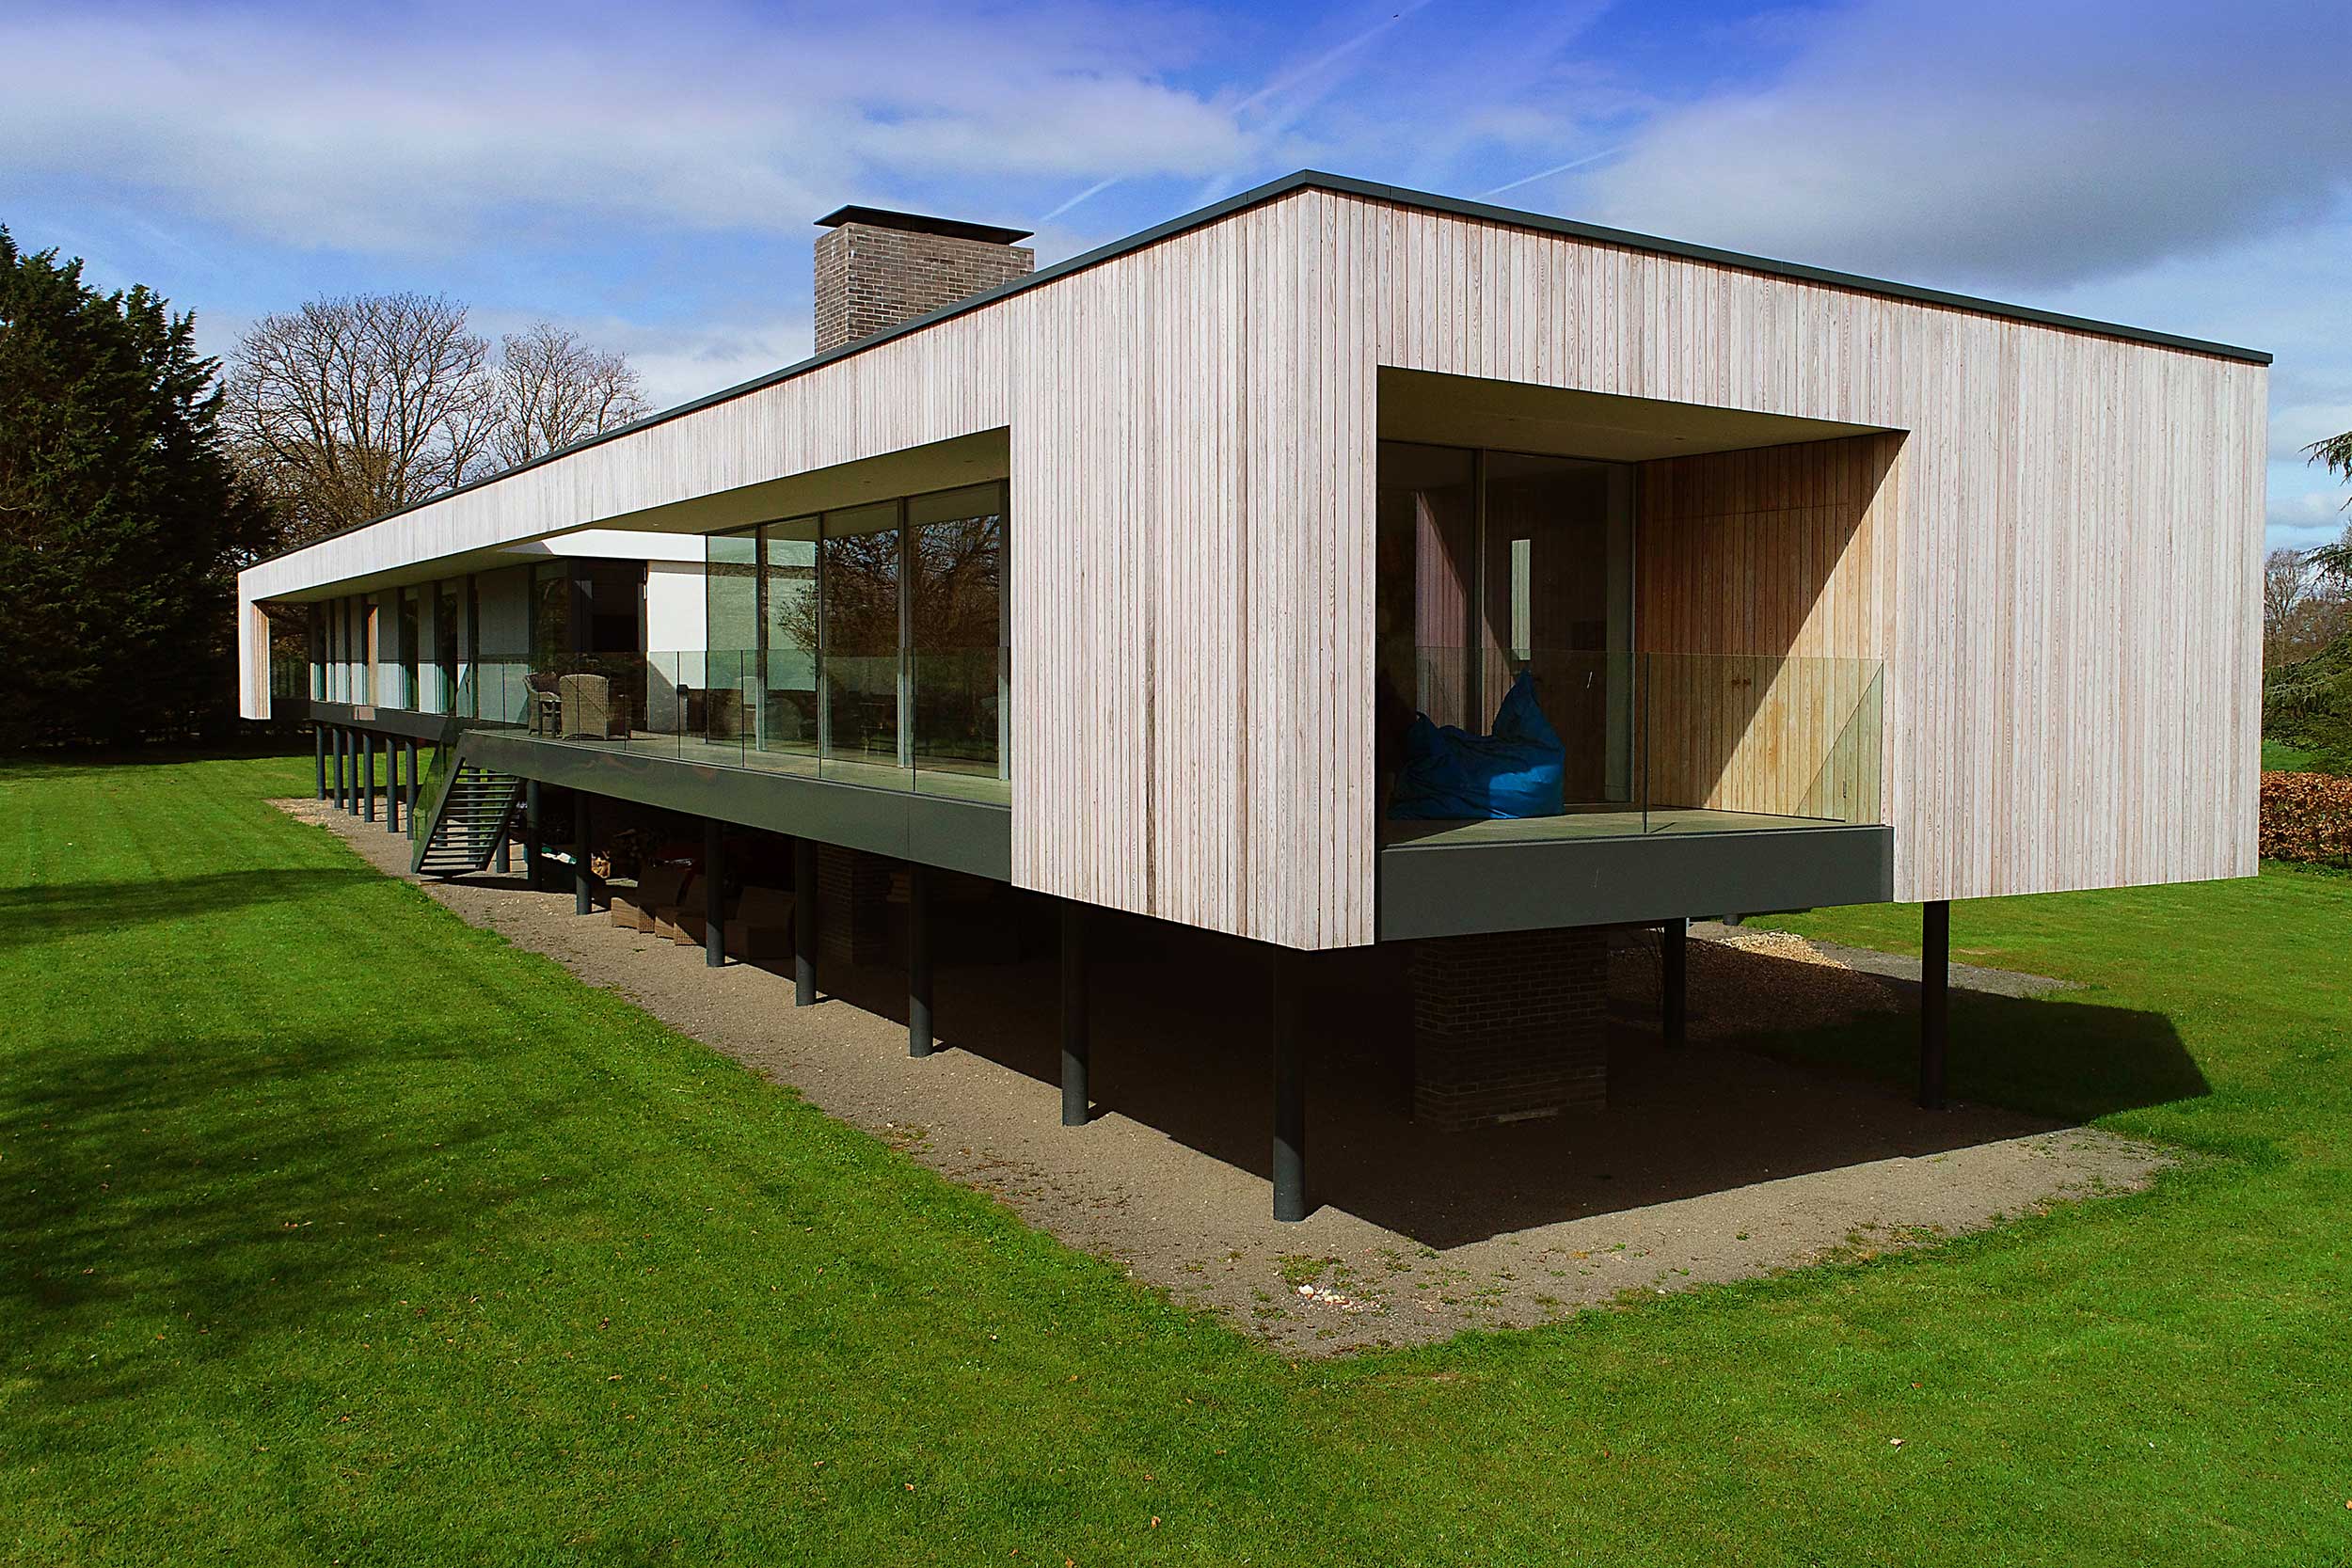  Smart Architecture - Henley-on-Thames gallery image 1